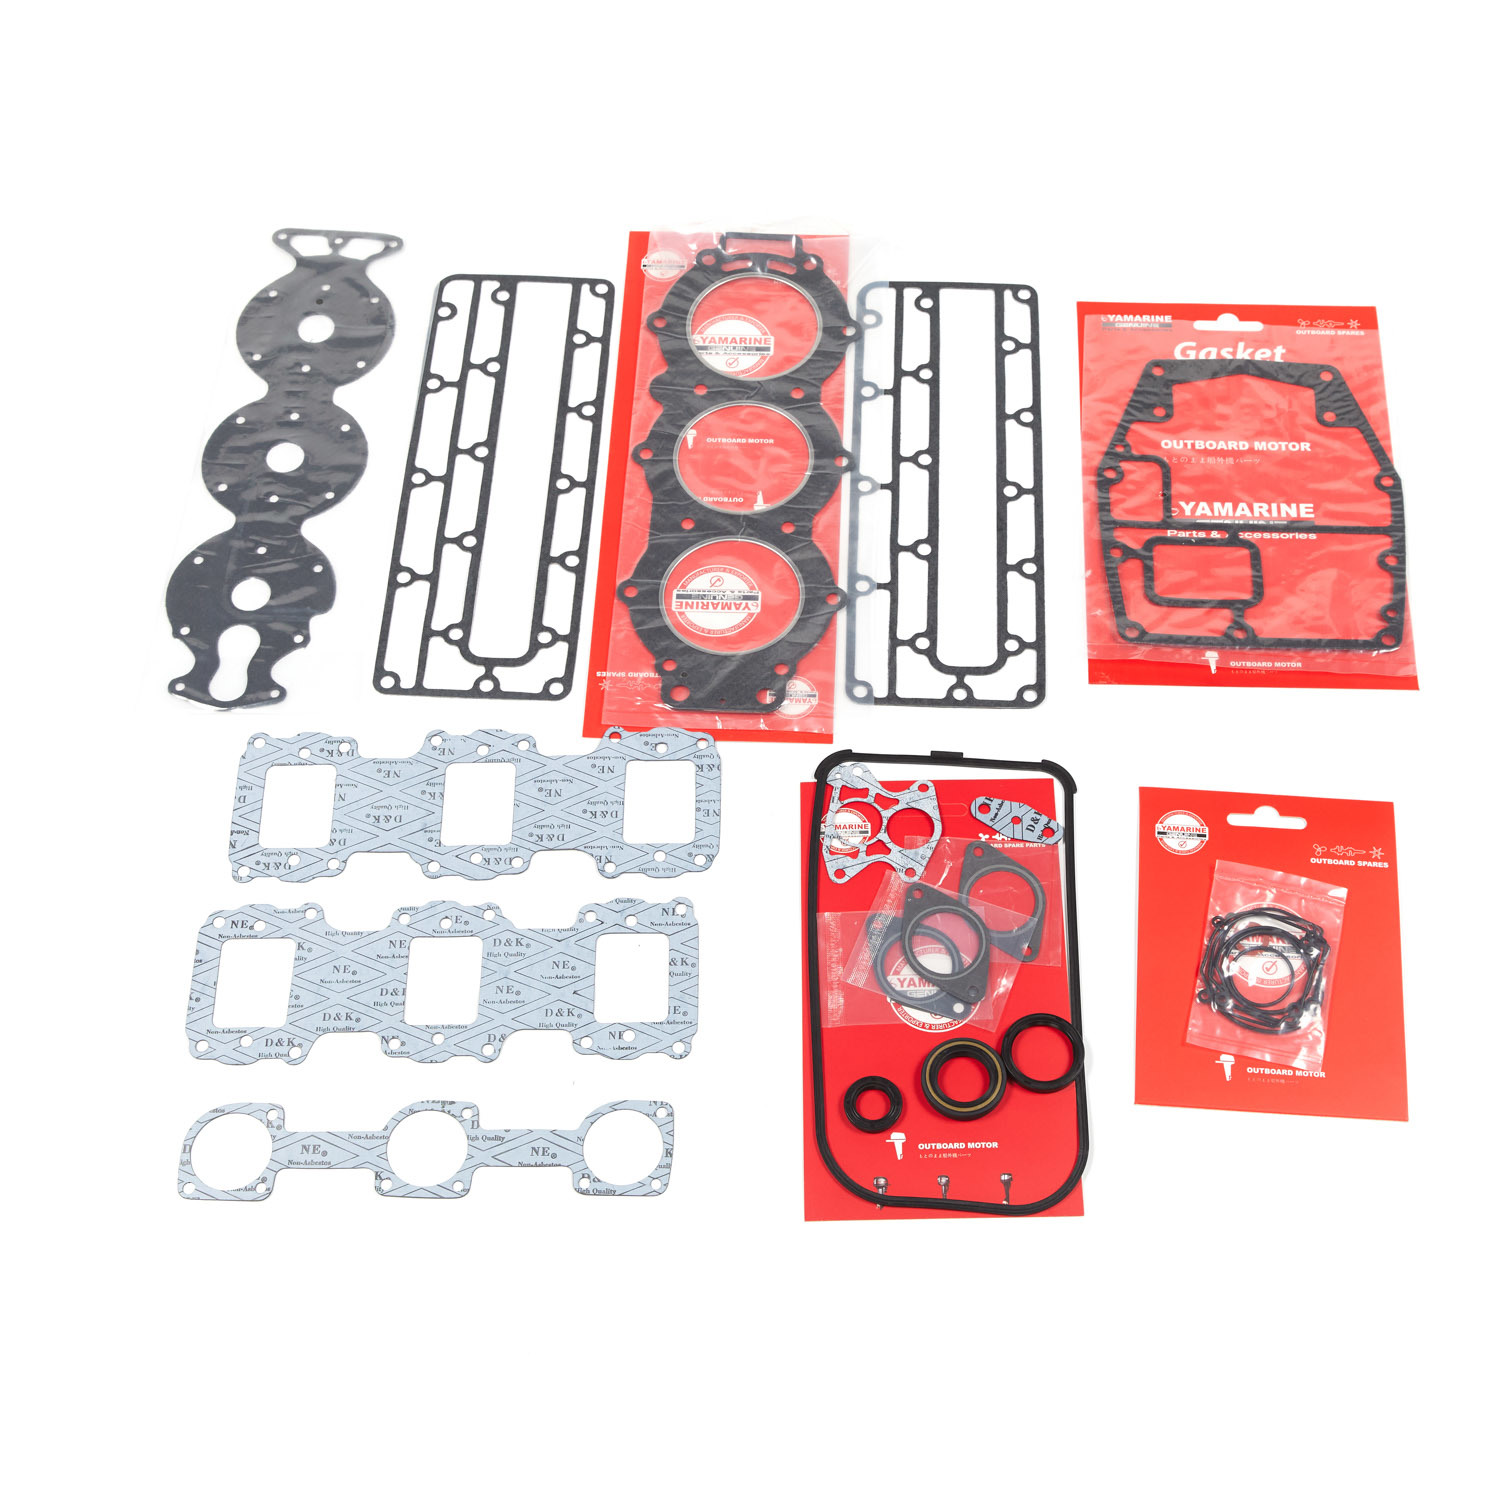 Yamarine Outboard Gasket, Exhaust Outer Cover 688-41114-A0-00, 688-41112-A0-00fit for 75/85HP Outboard Engine